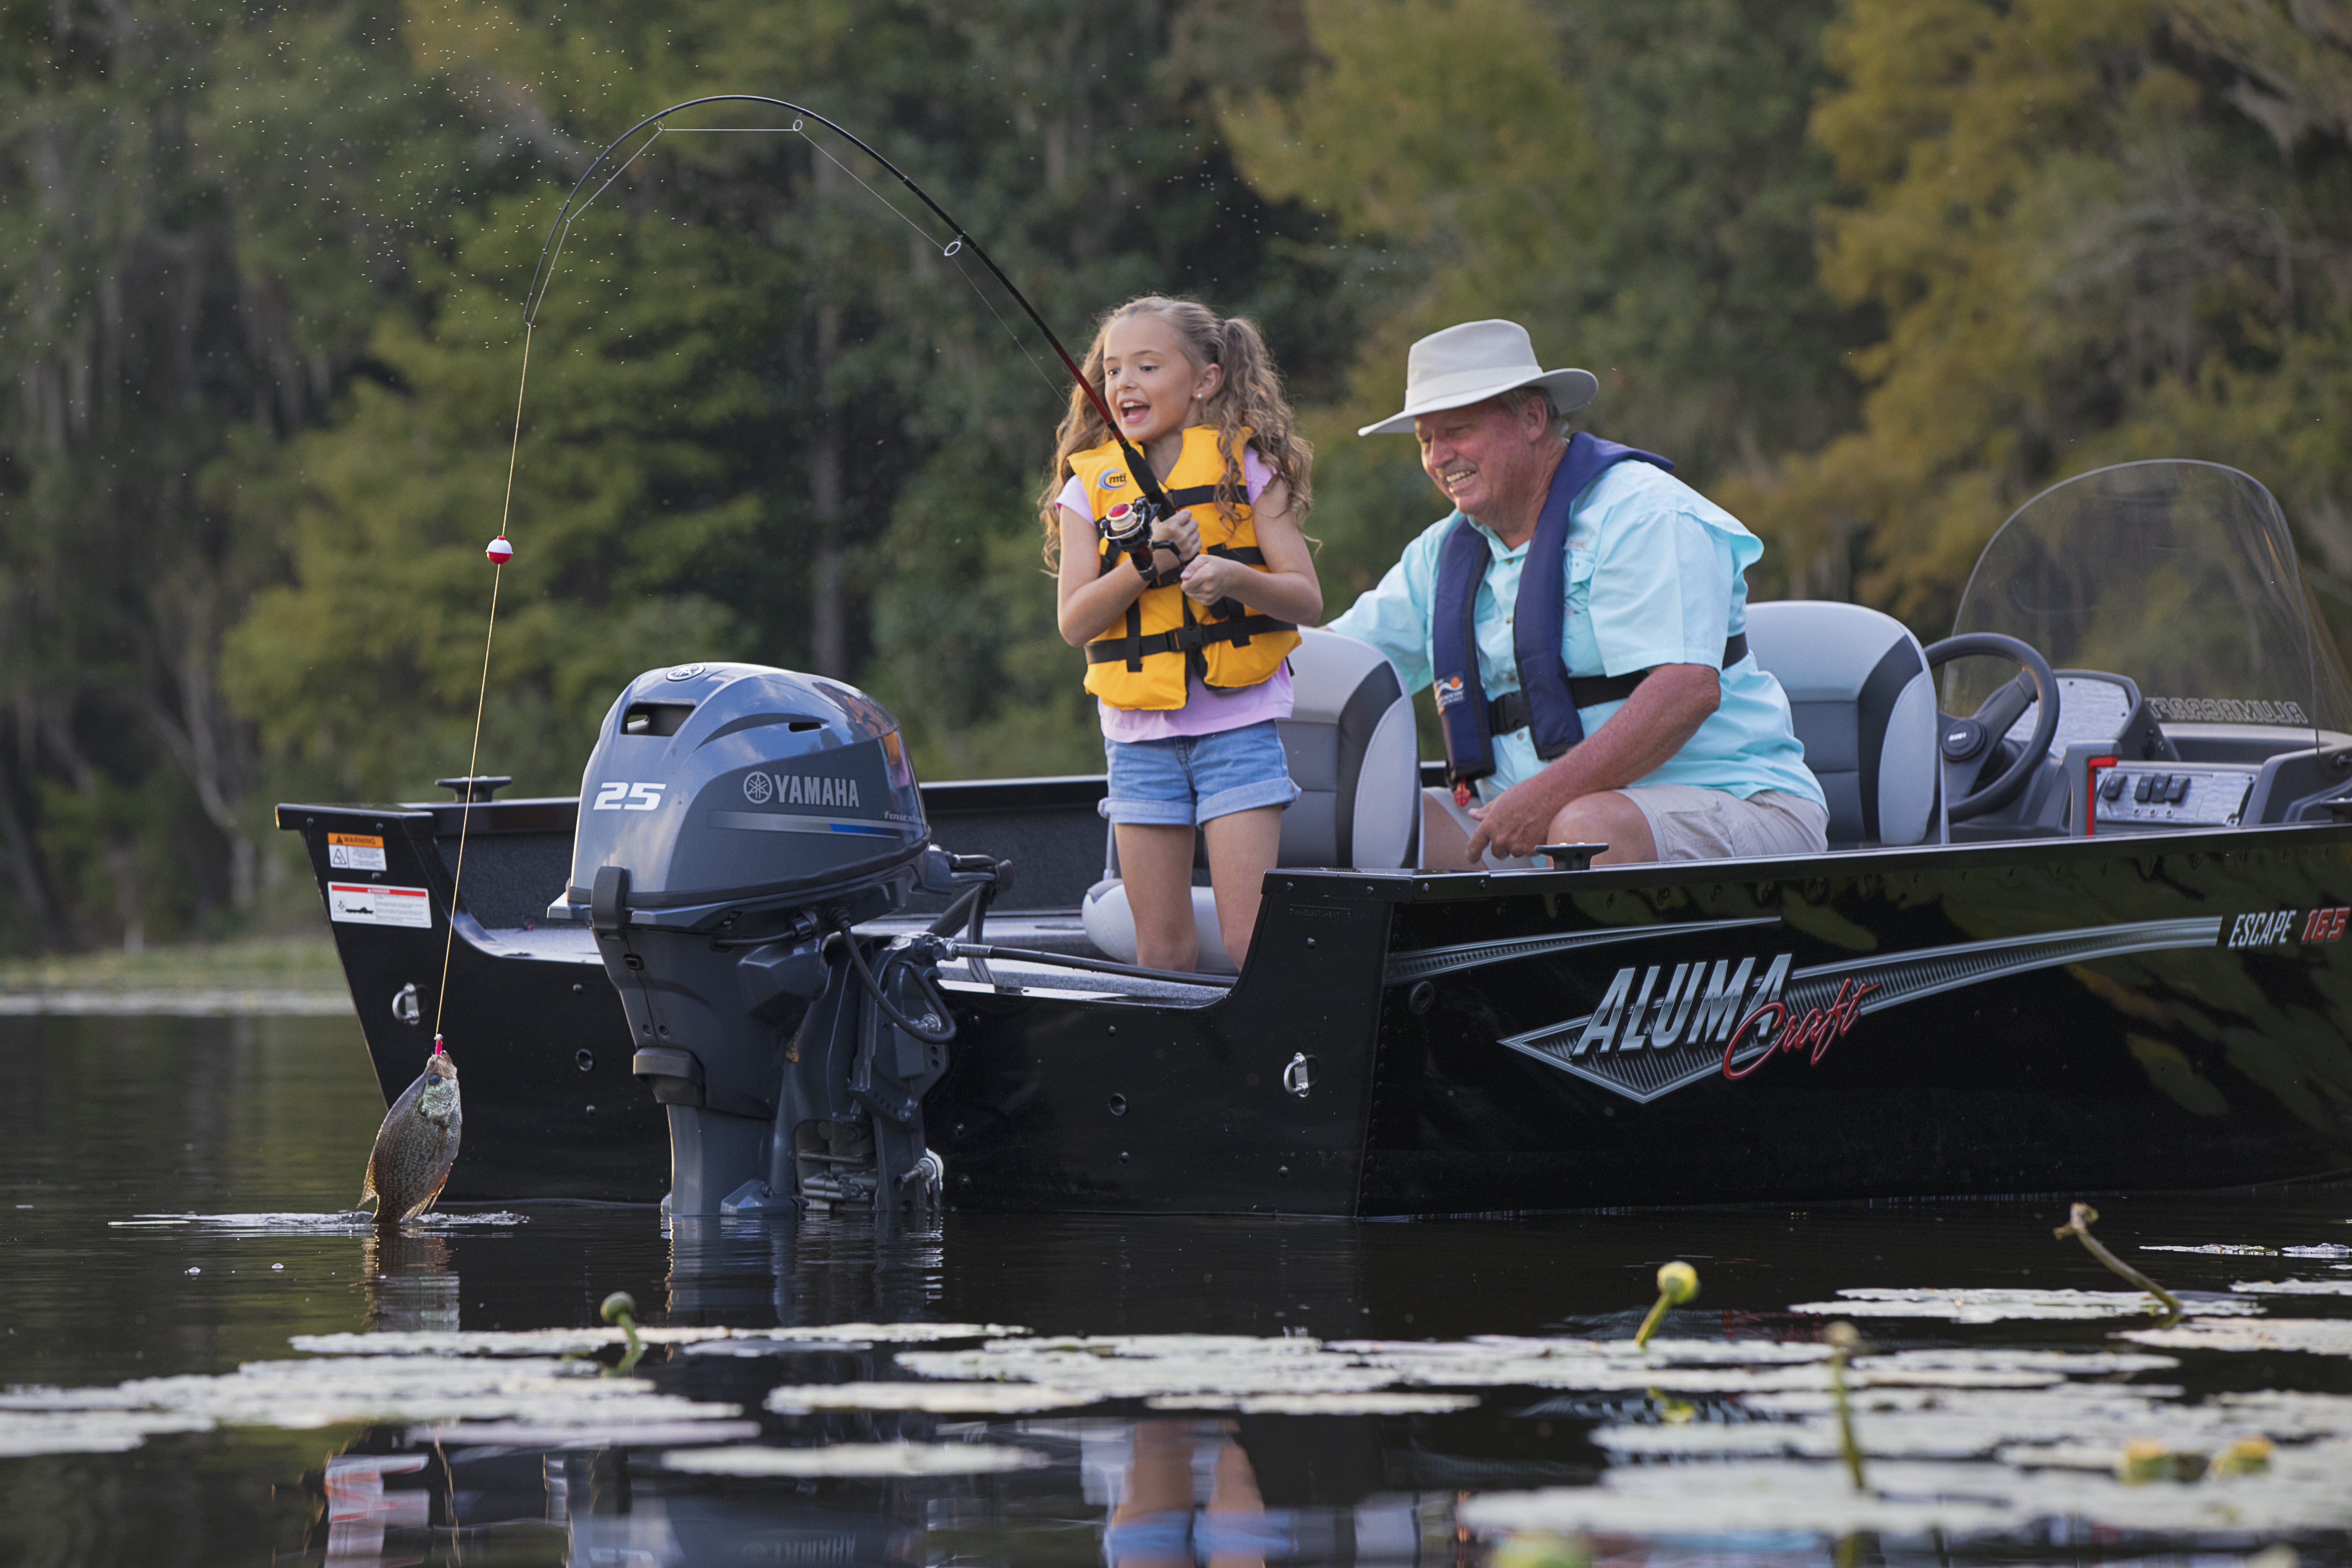 Grandpa & granddaughter fishing from Alumacraft boat with 25HP Yamaha outboard